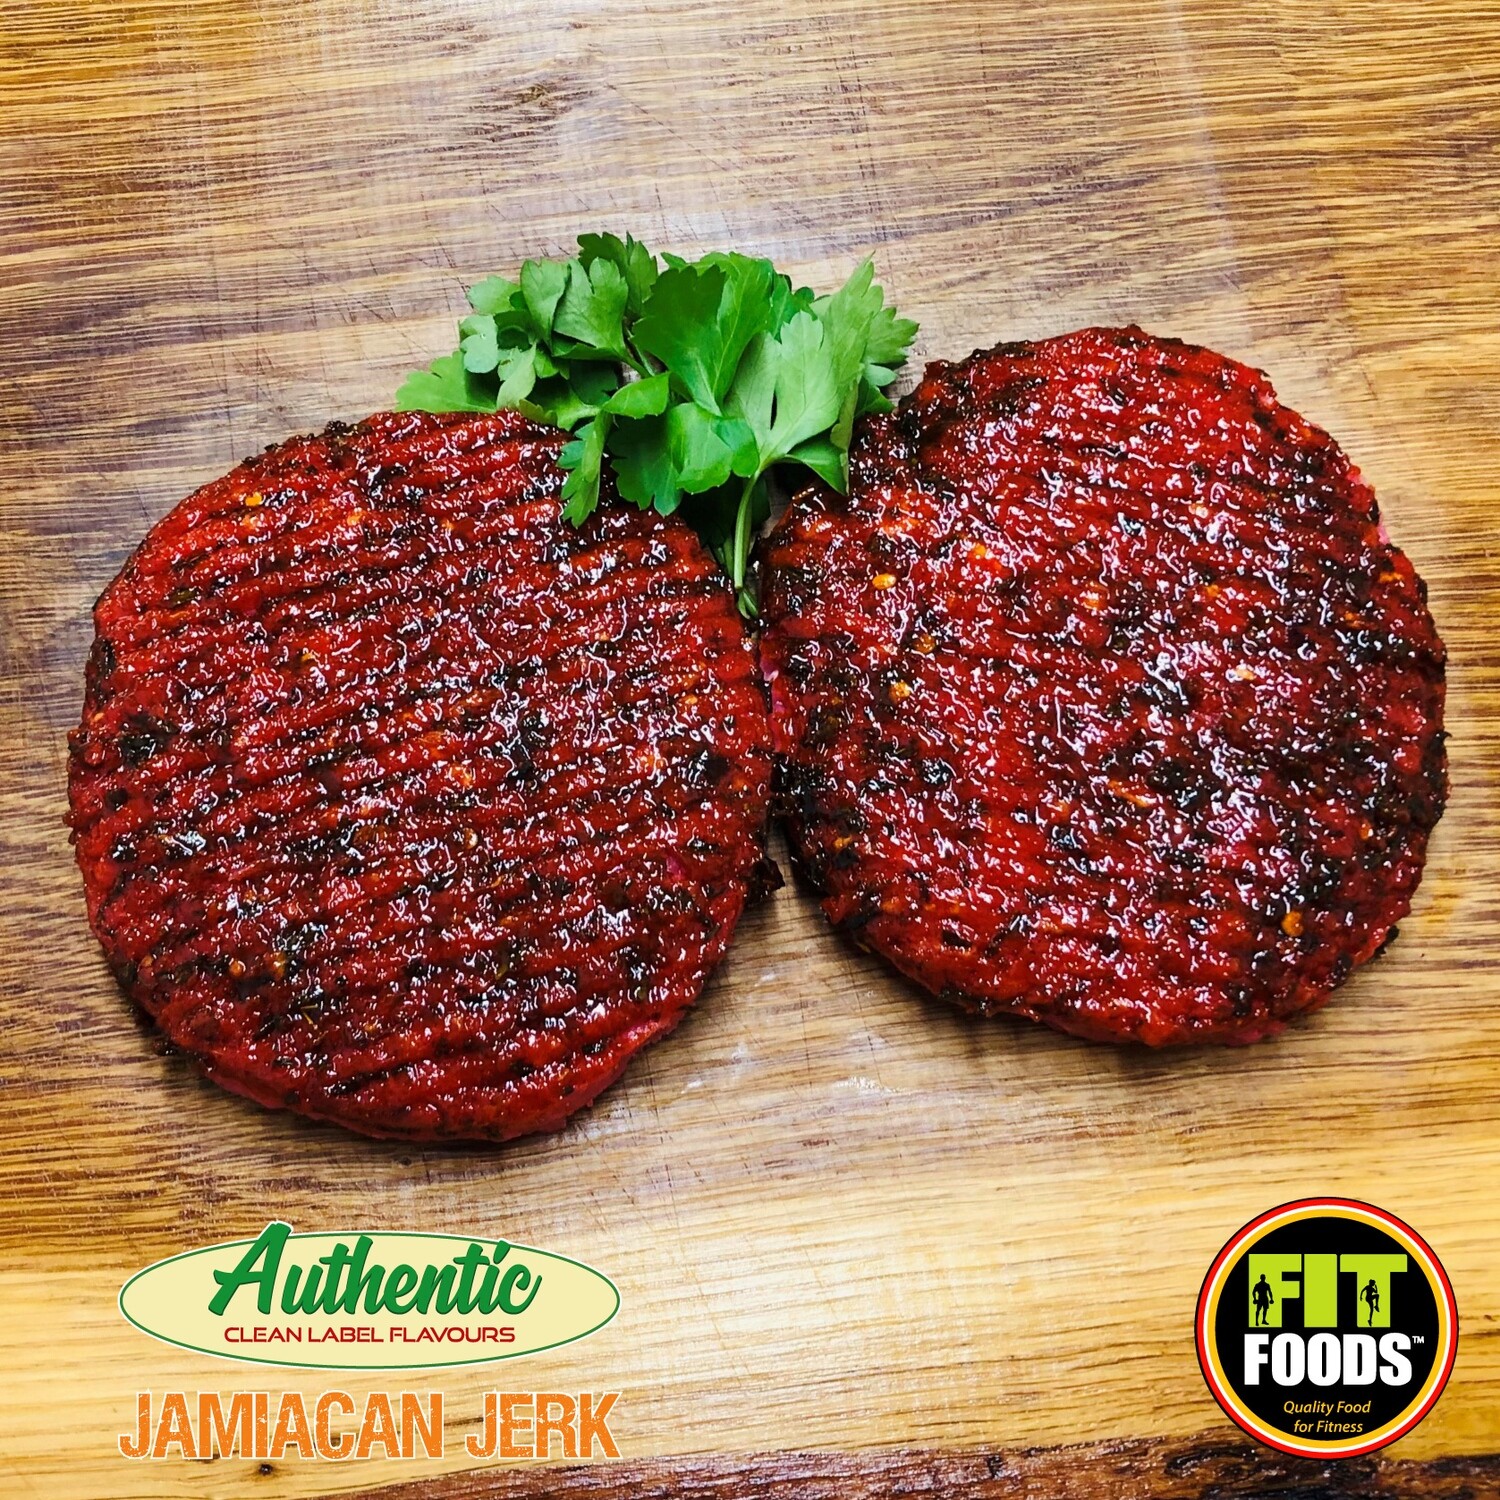 FIT FOODS 'AUTHENTIC' TURKEY BURGERS - ANY 2 PACKS FOR £7.00